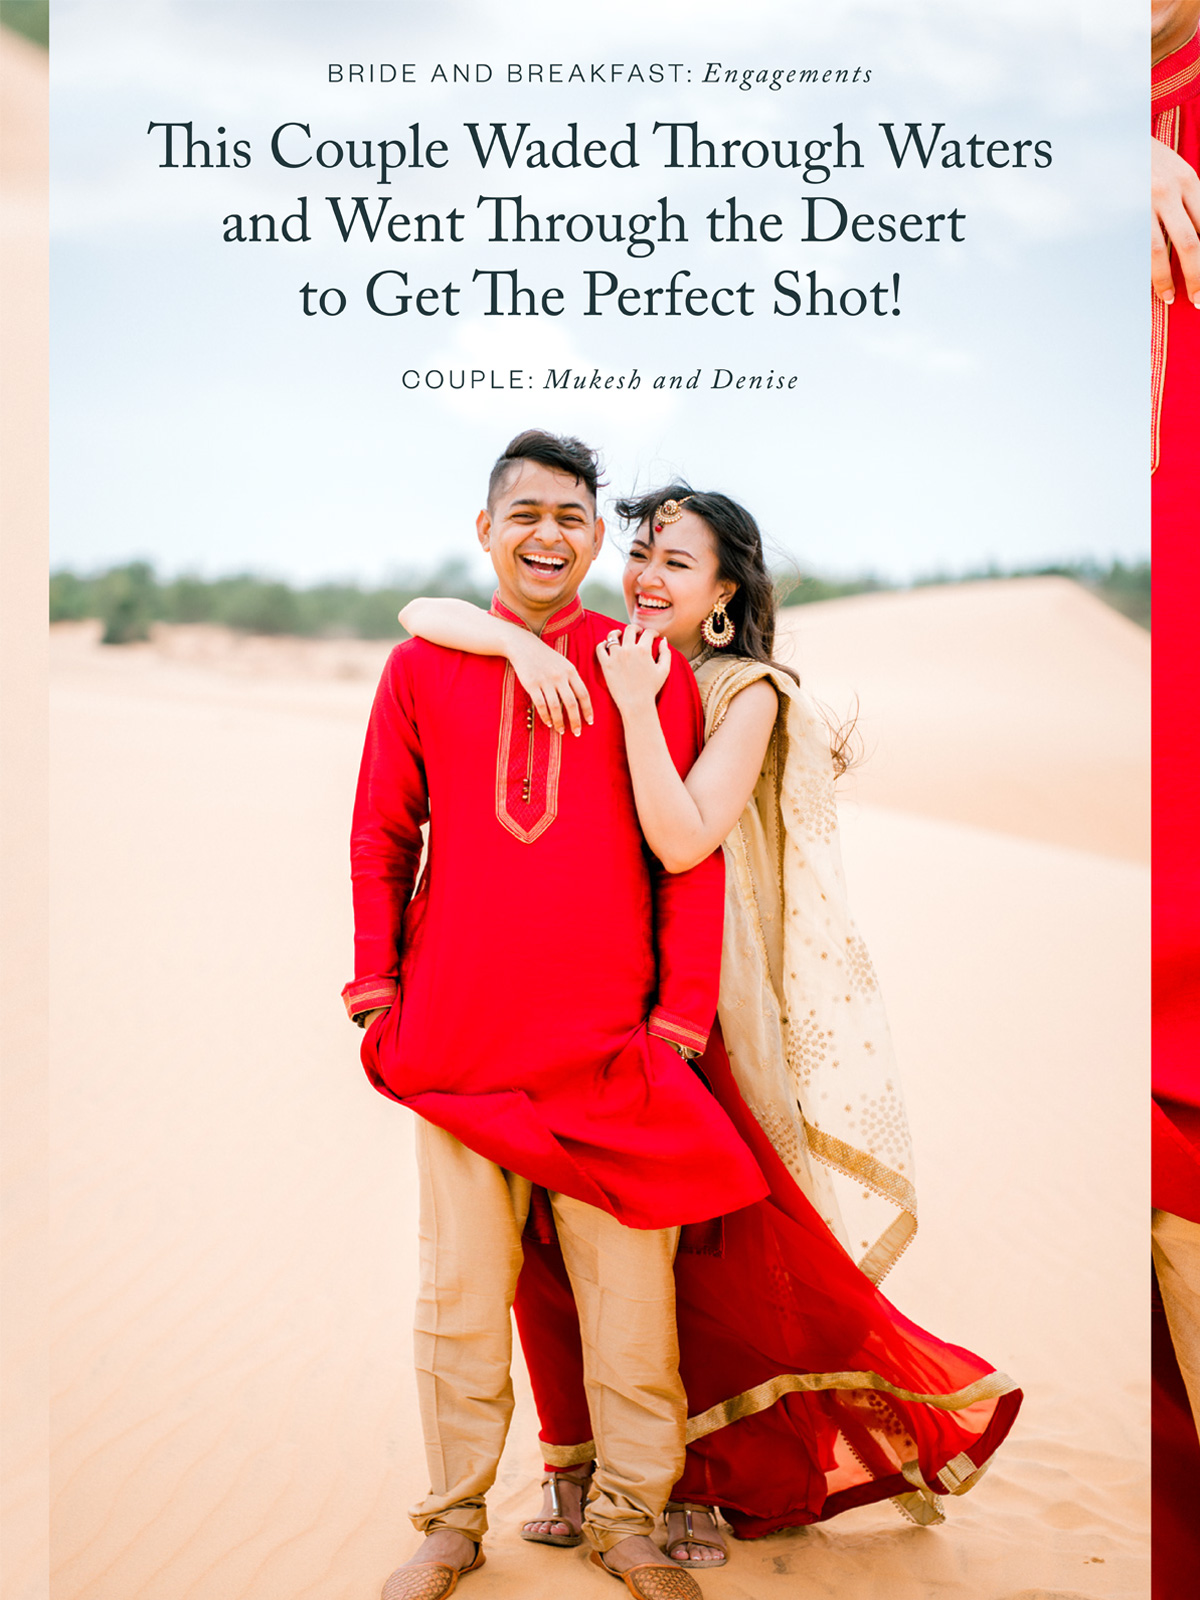 This Couple Waded Through Waters and Went Through the Desert to Get The Perfect Shot!